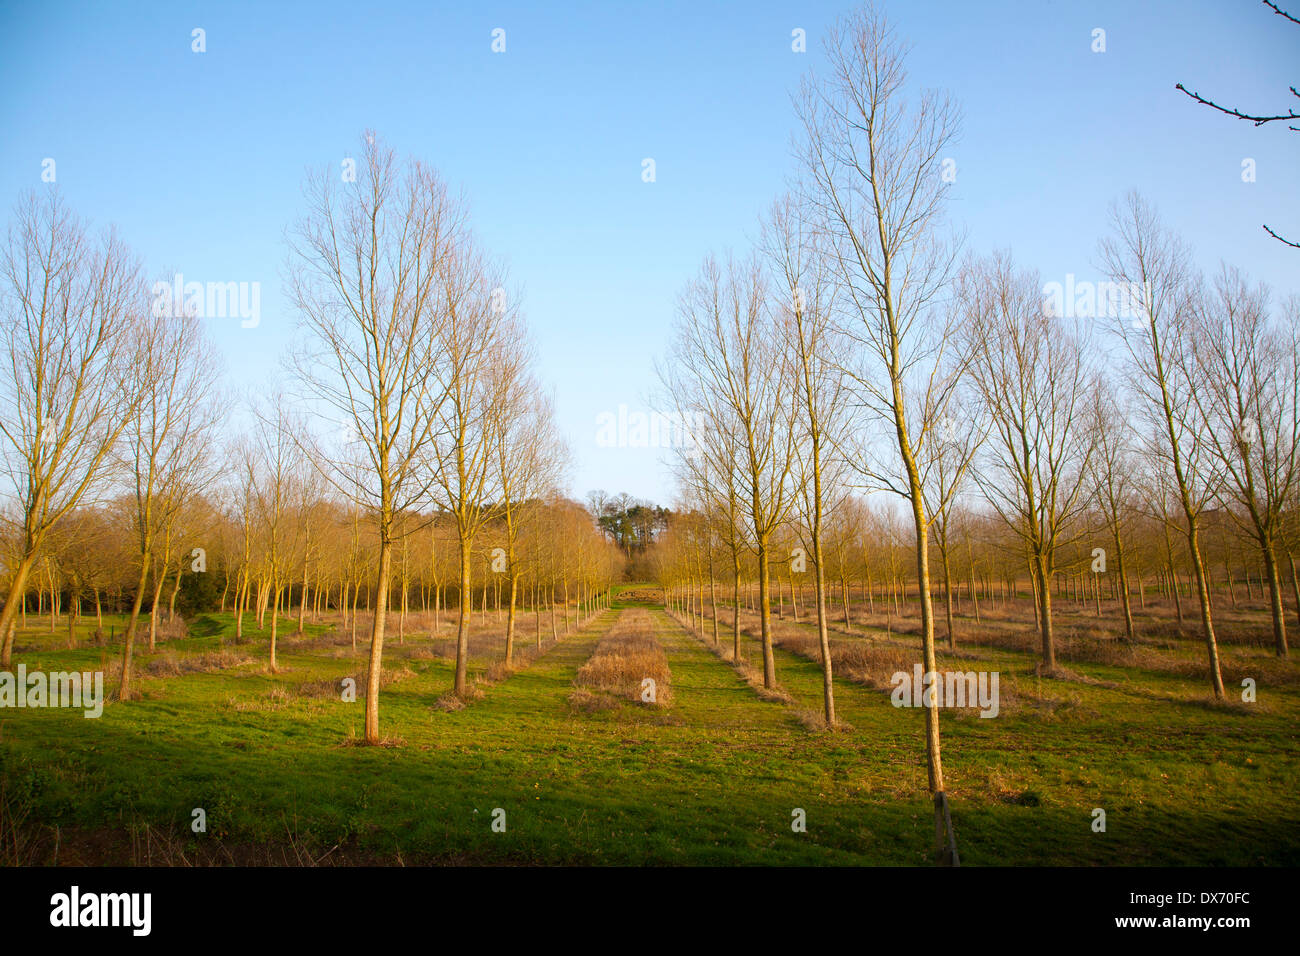 Plantation of Salix alba, cricket bat or white willow, trees in winter at Bromeswell, Suffolk, England Stock Photo